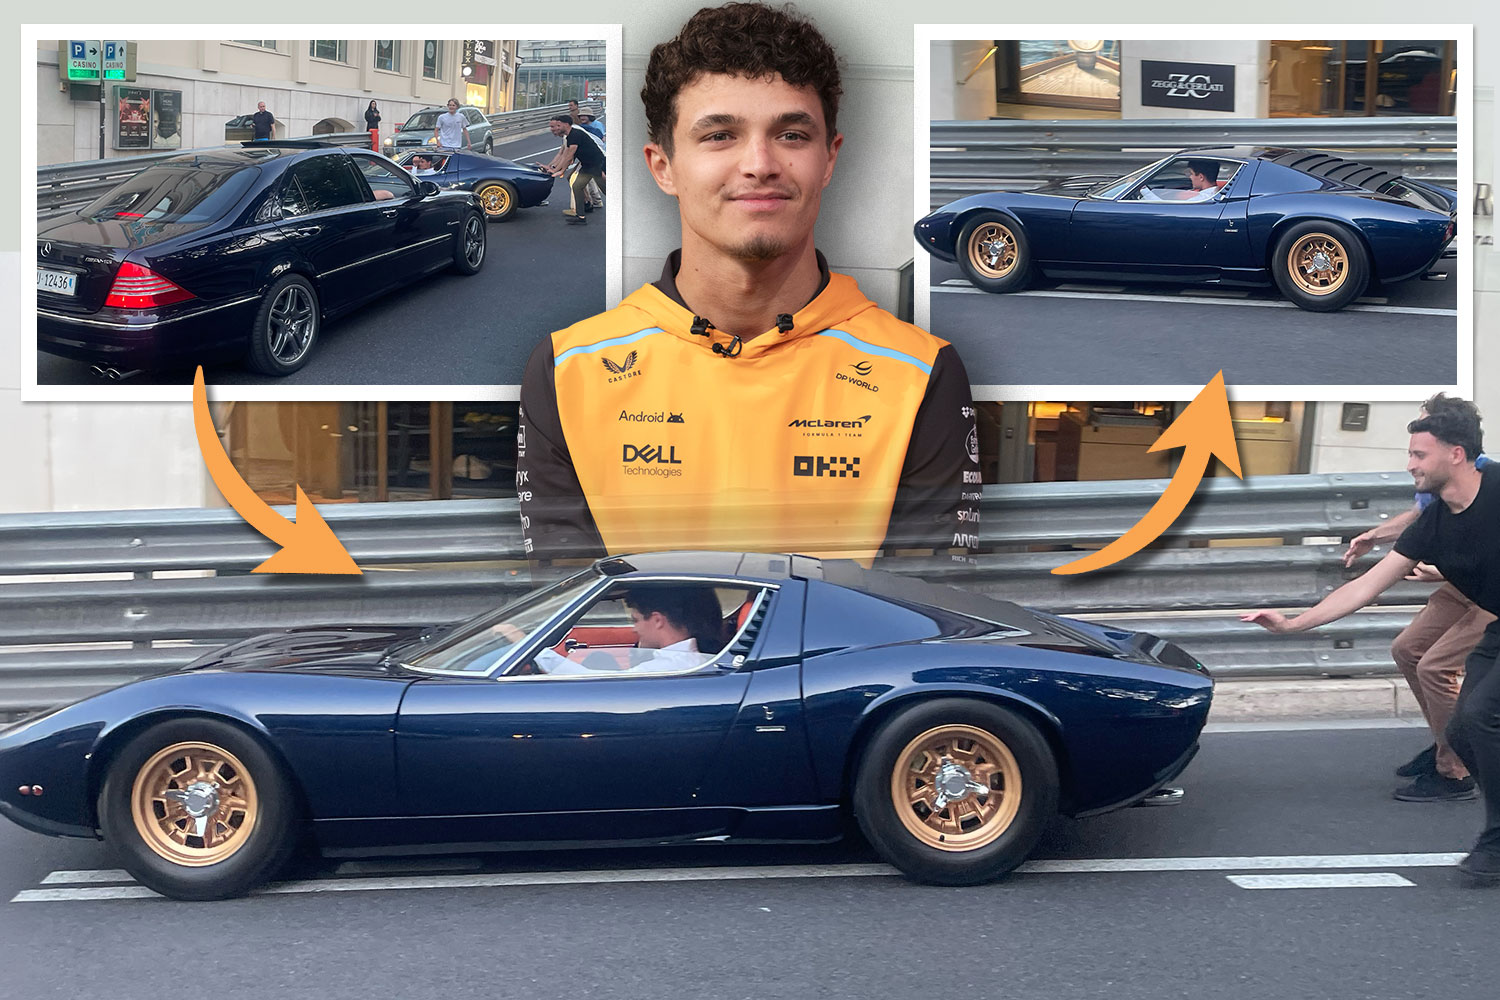 Lando Norris needs a push from fans after £1.5m Lambo grinds to halt